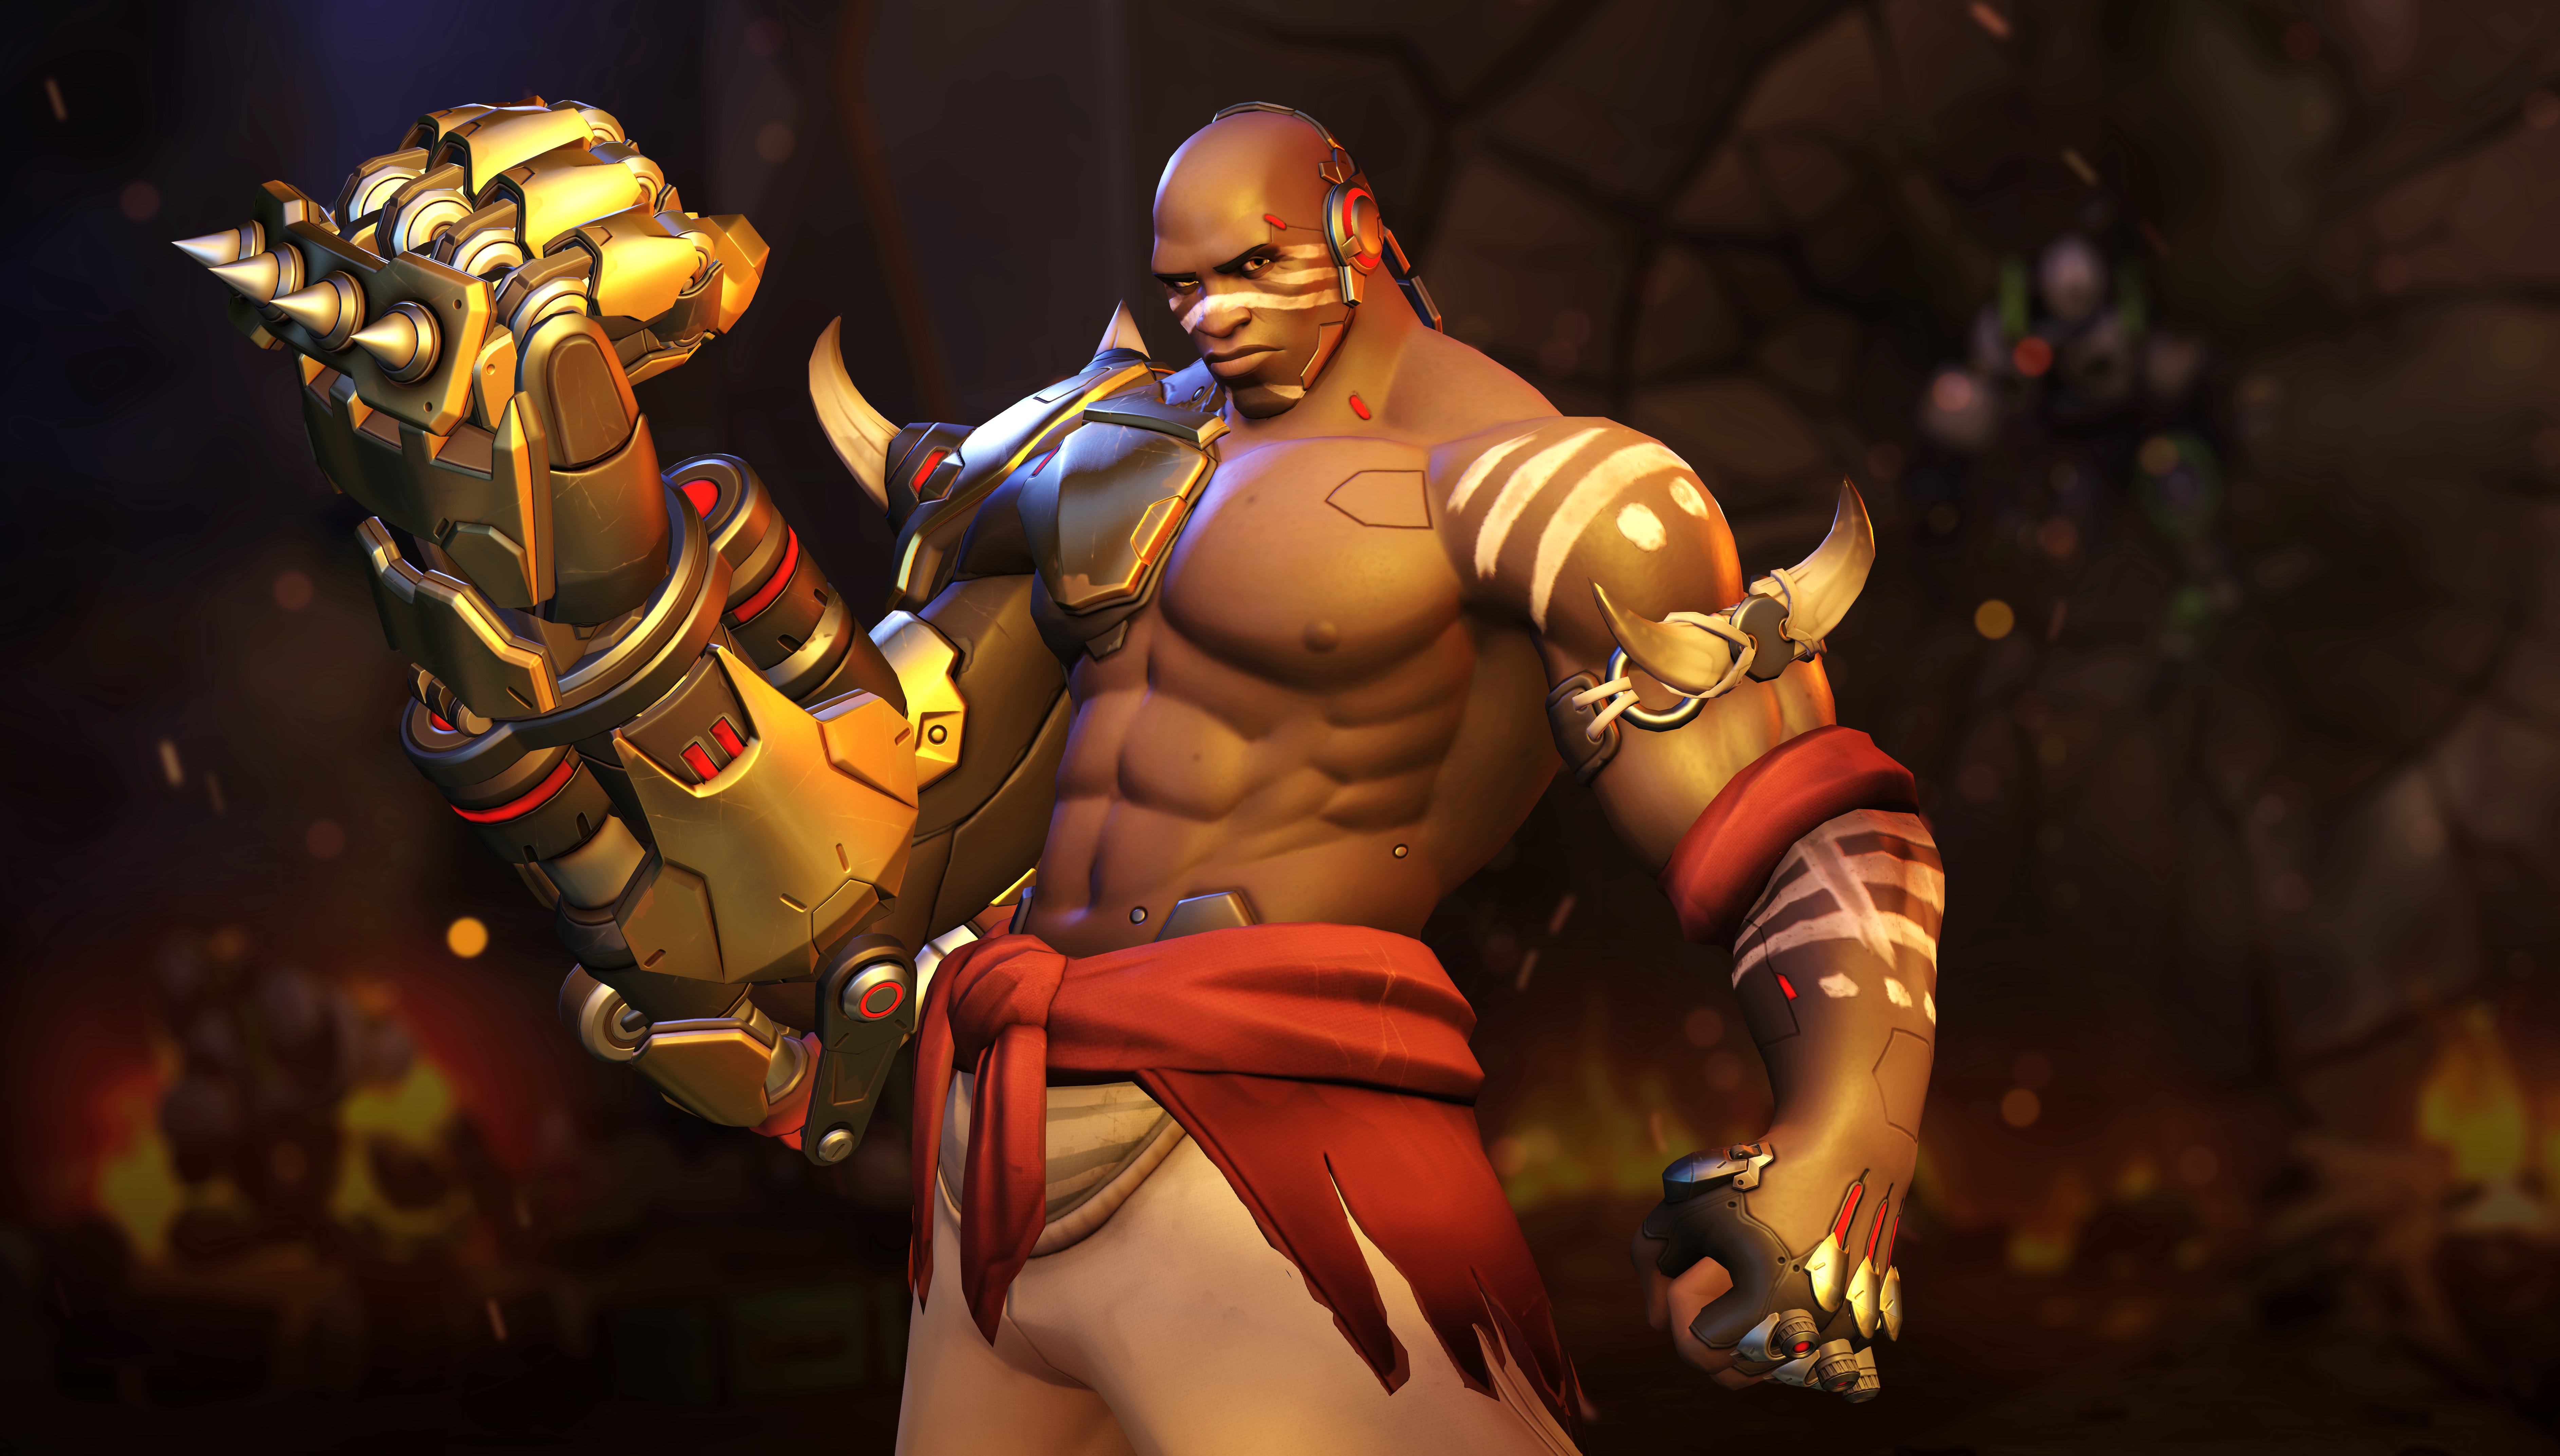 Overwatchs new hero is Doomfist and you can check him